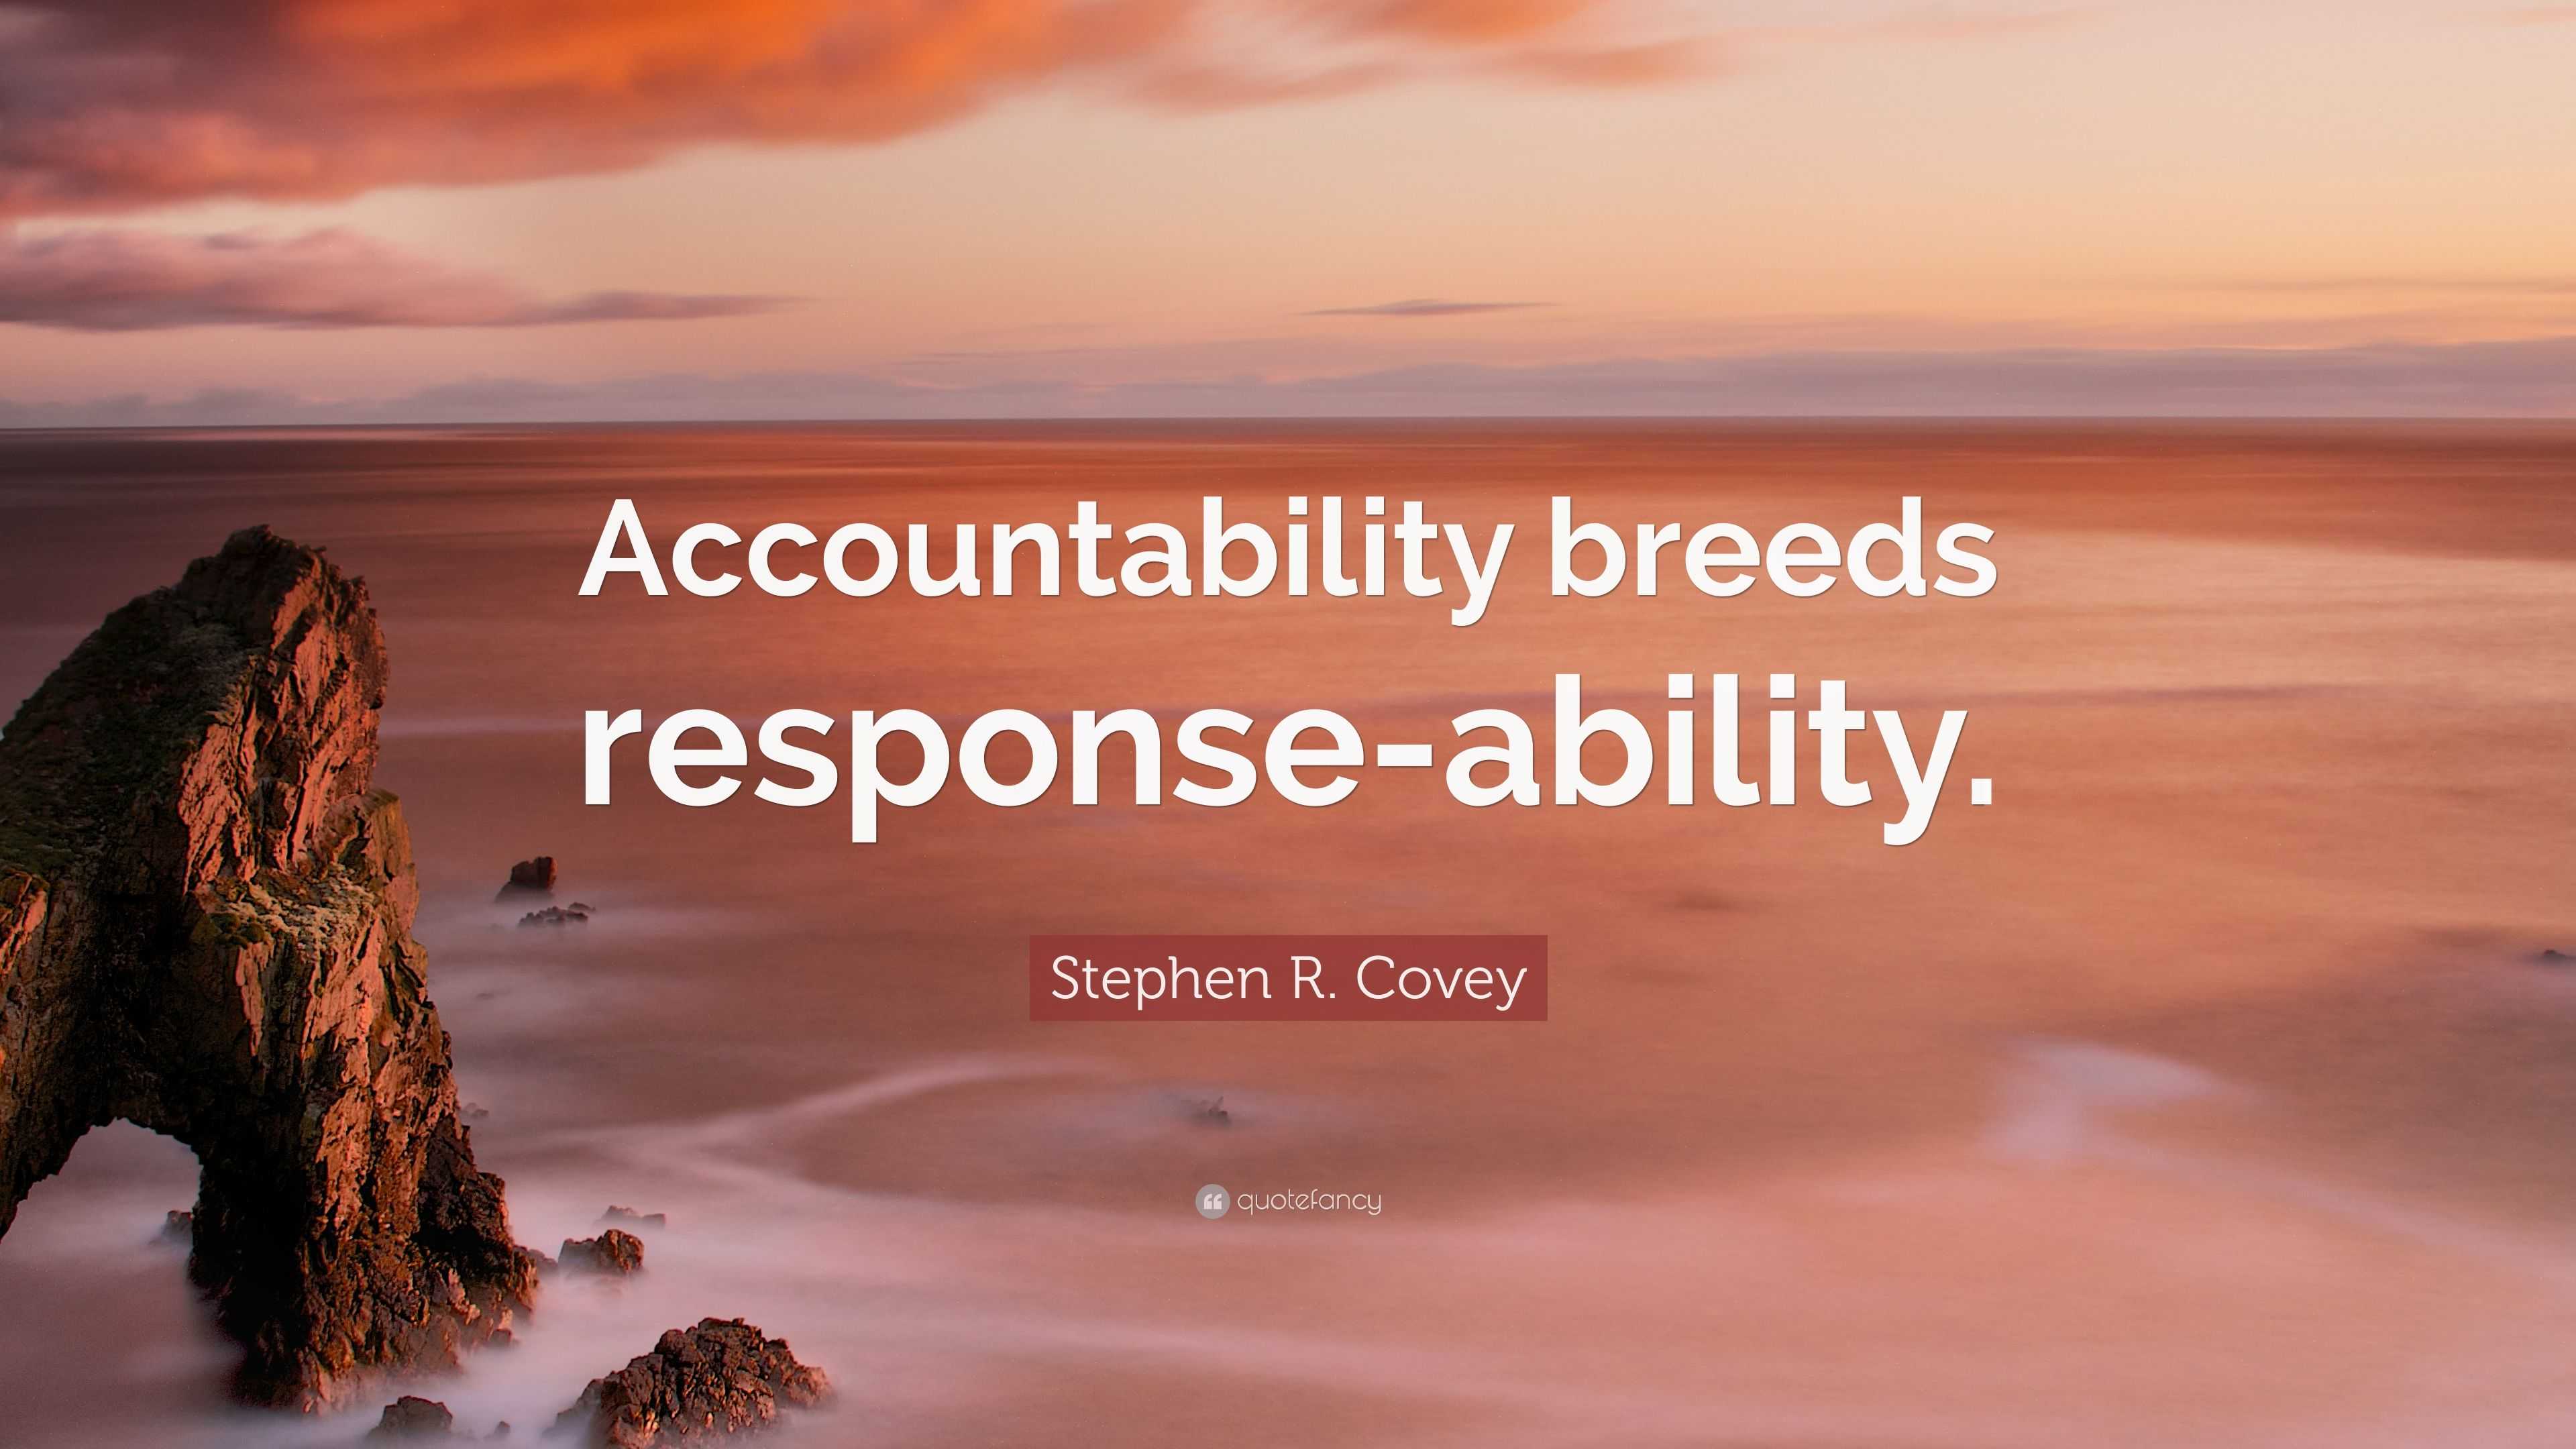 Stephen R. Covey Quote: “Accountability breeds response-ability.”